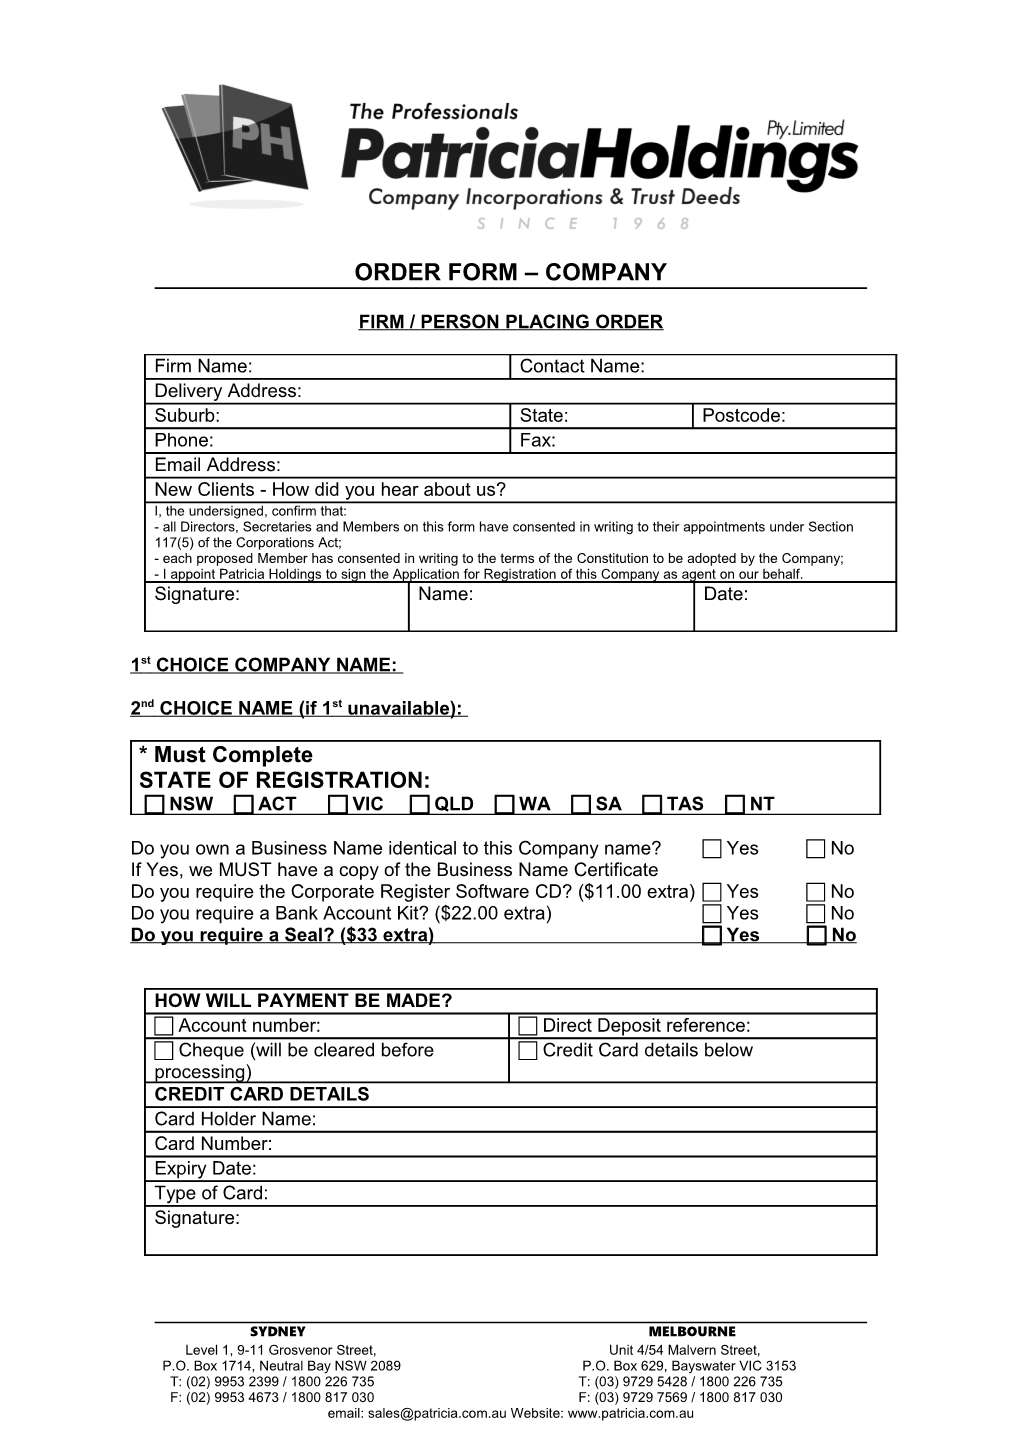 Firm / Person Placing Order